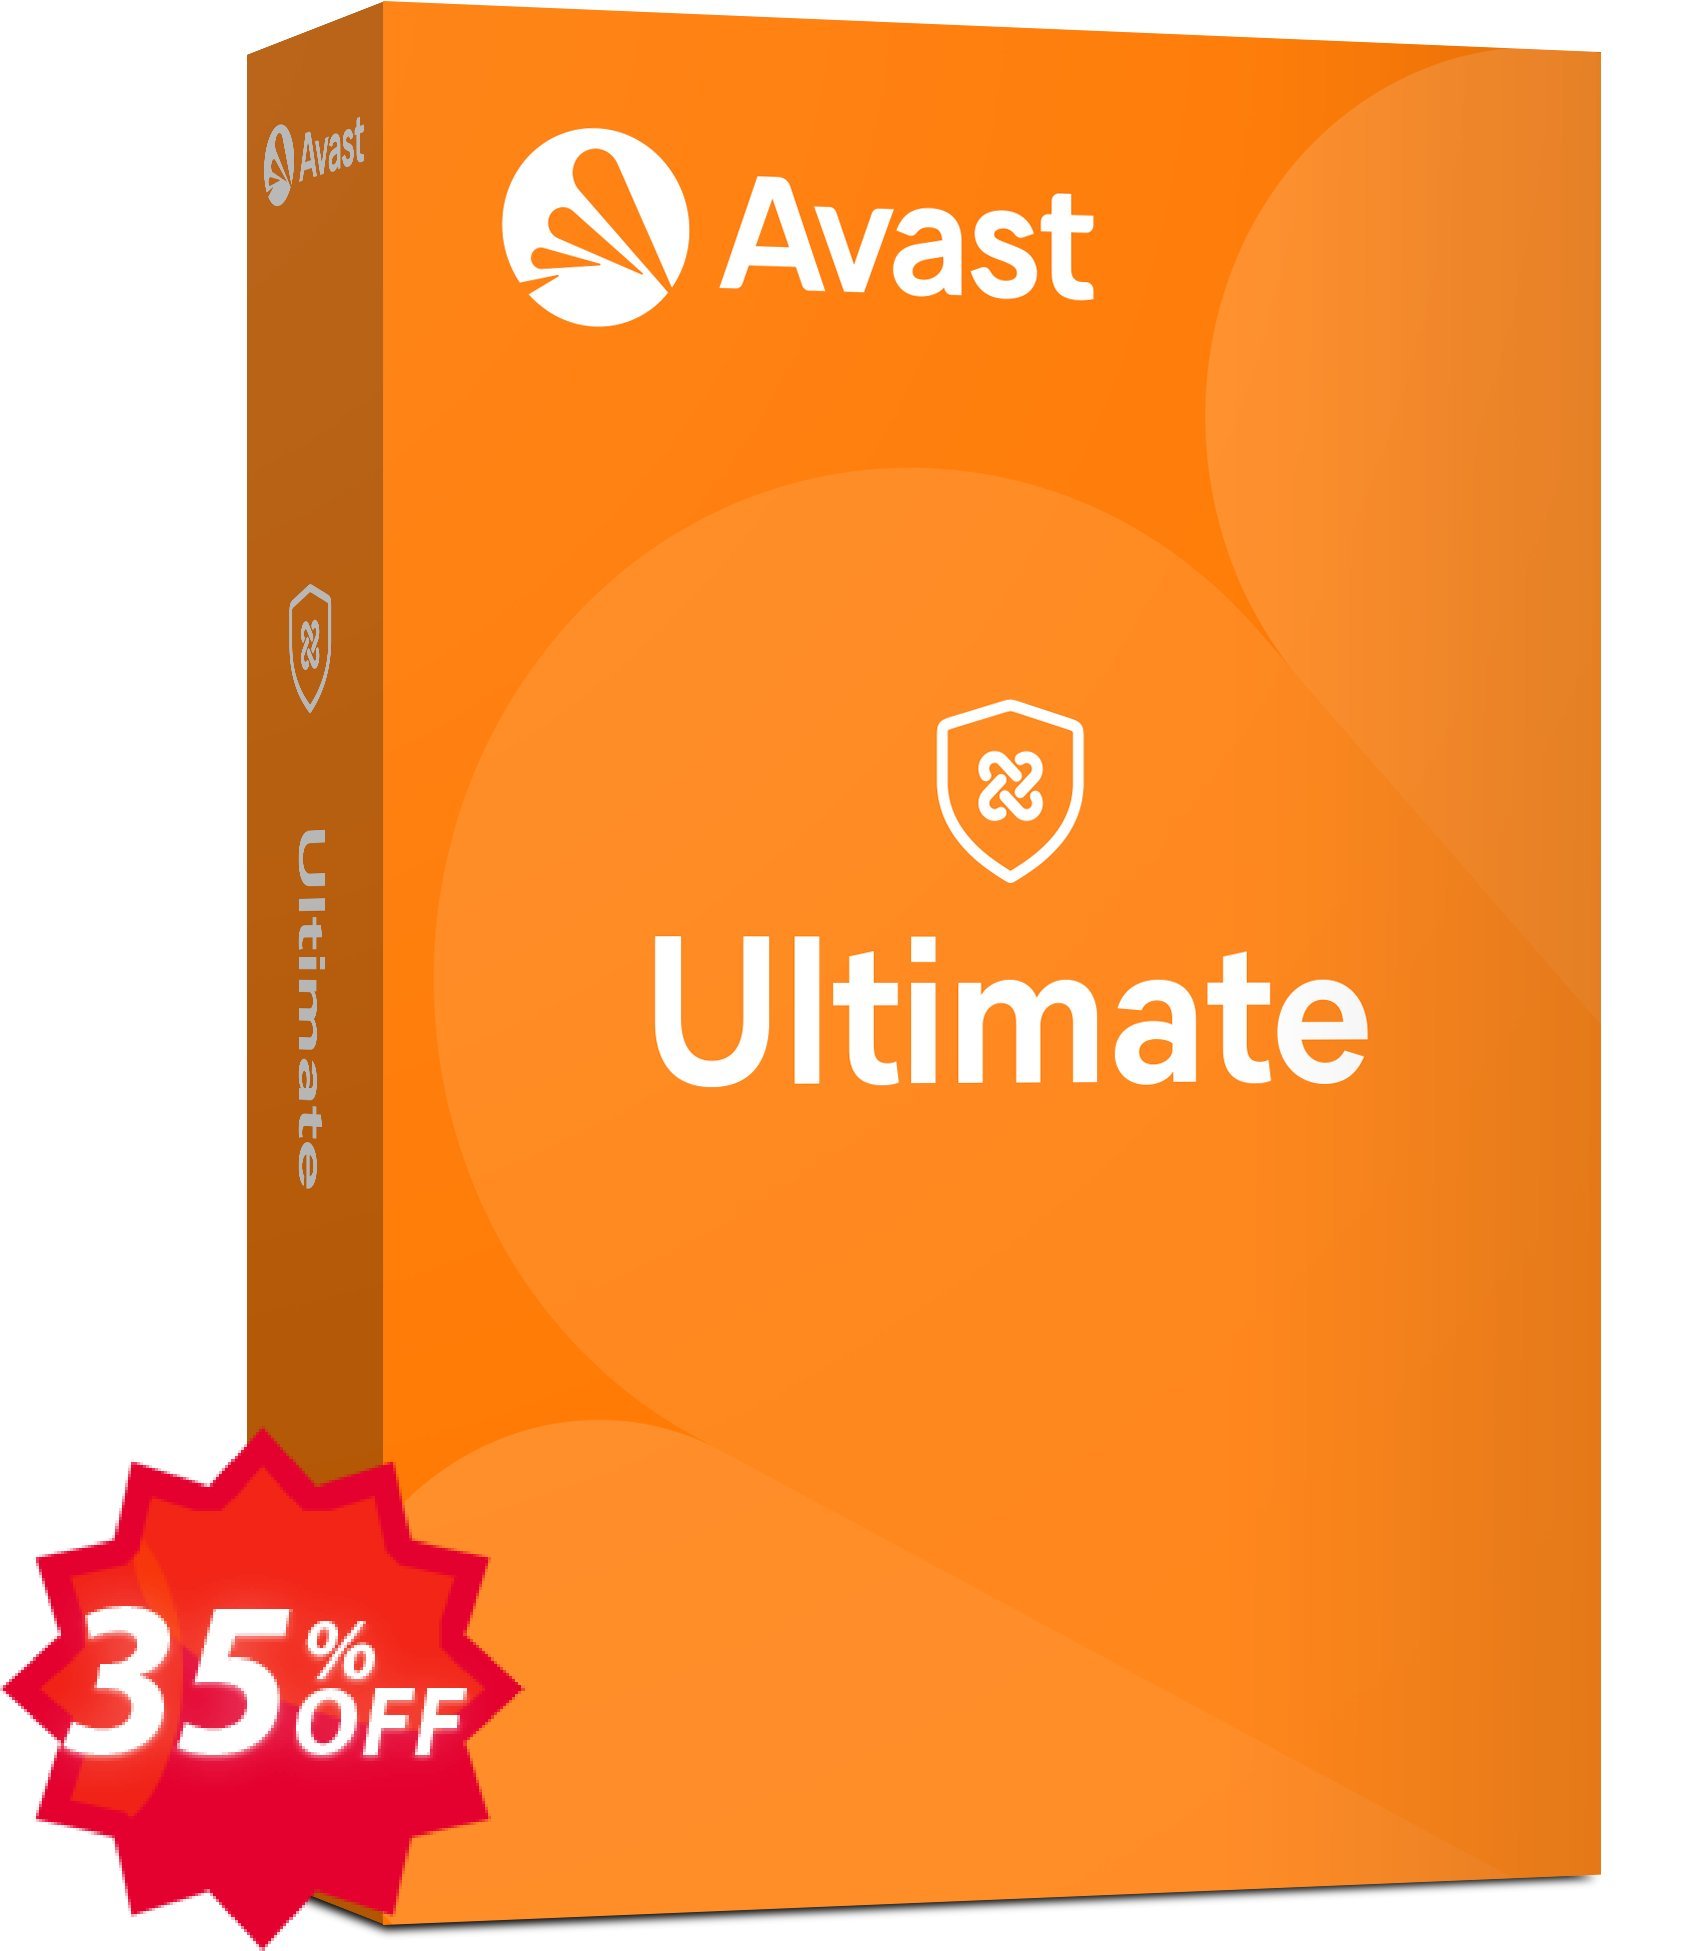 Avast Ultimate Coupon code 35% discount 